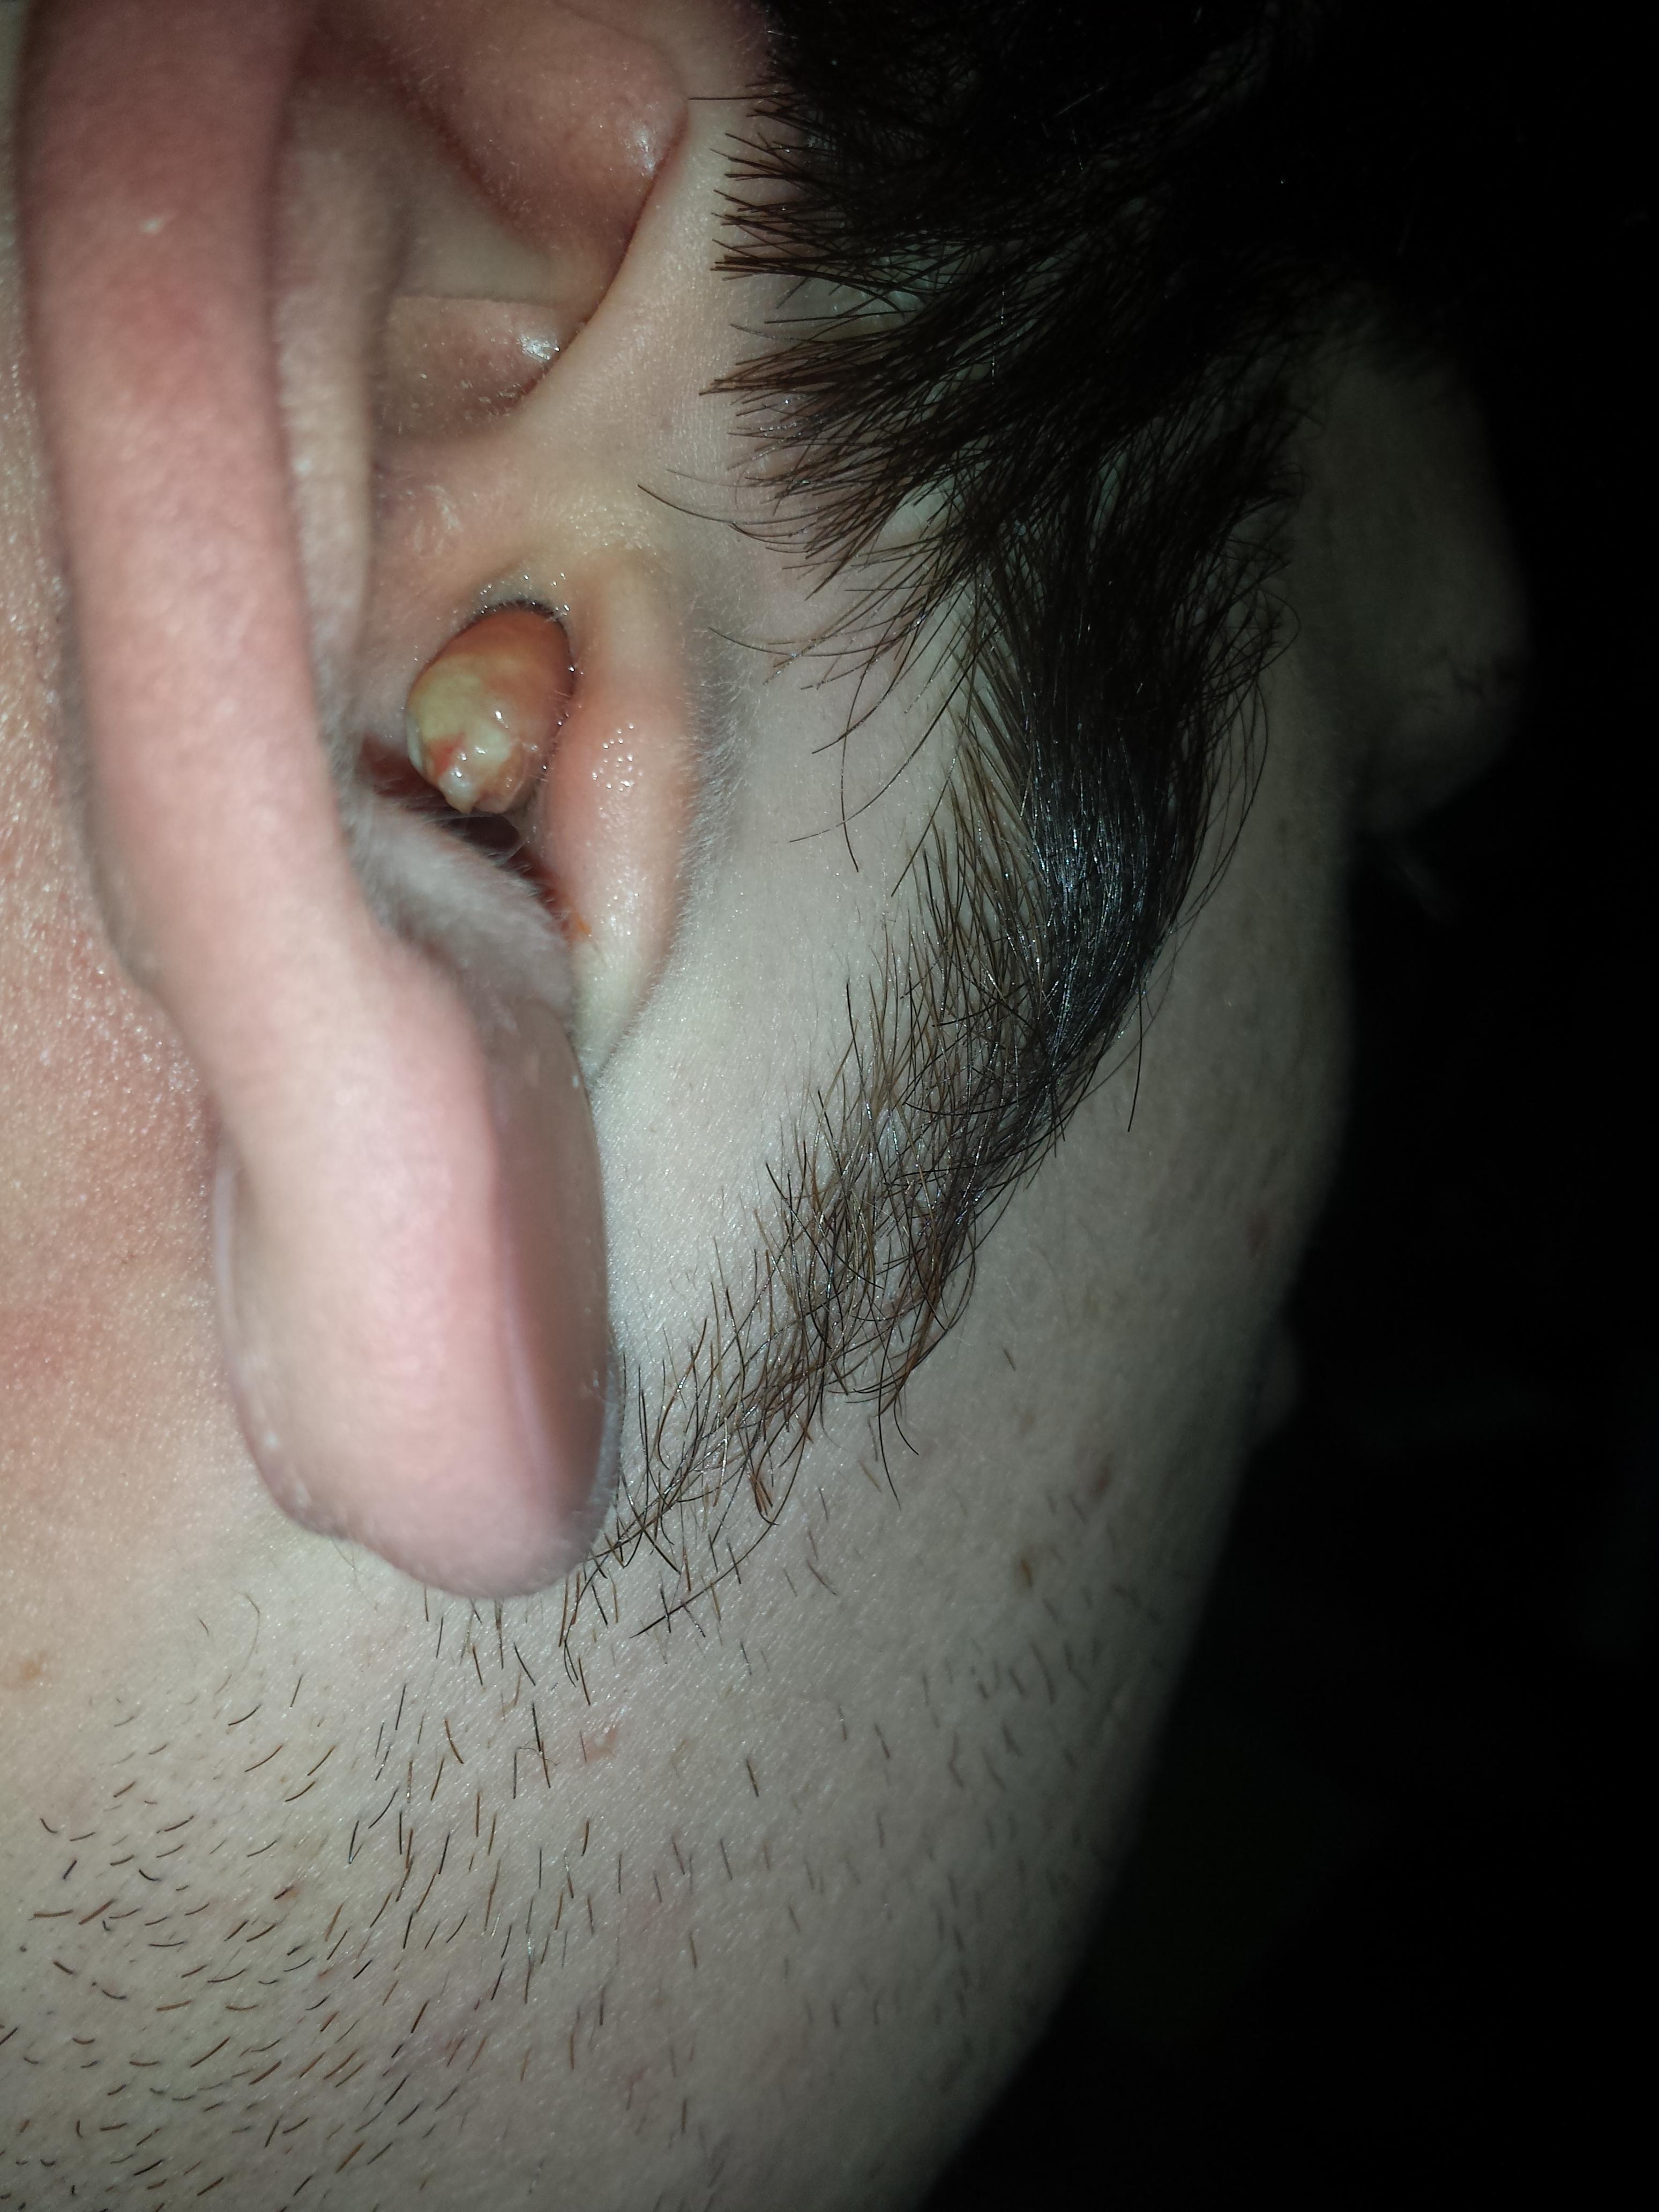 Ear Infection 1